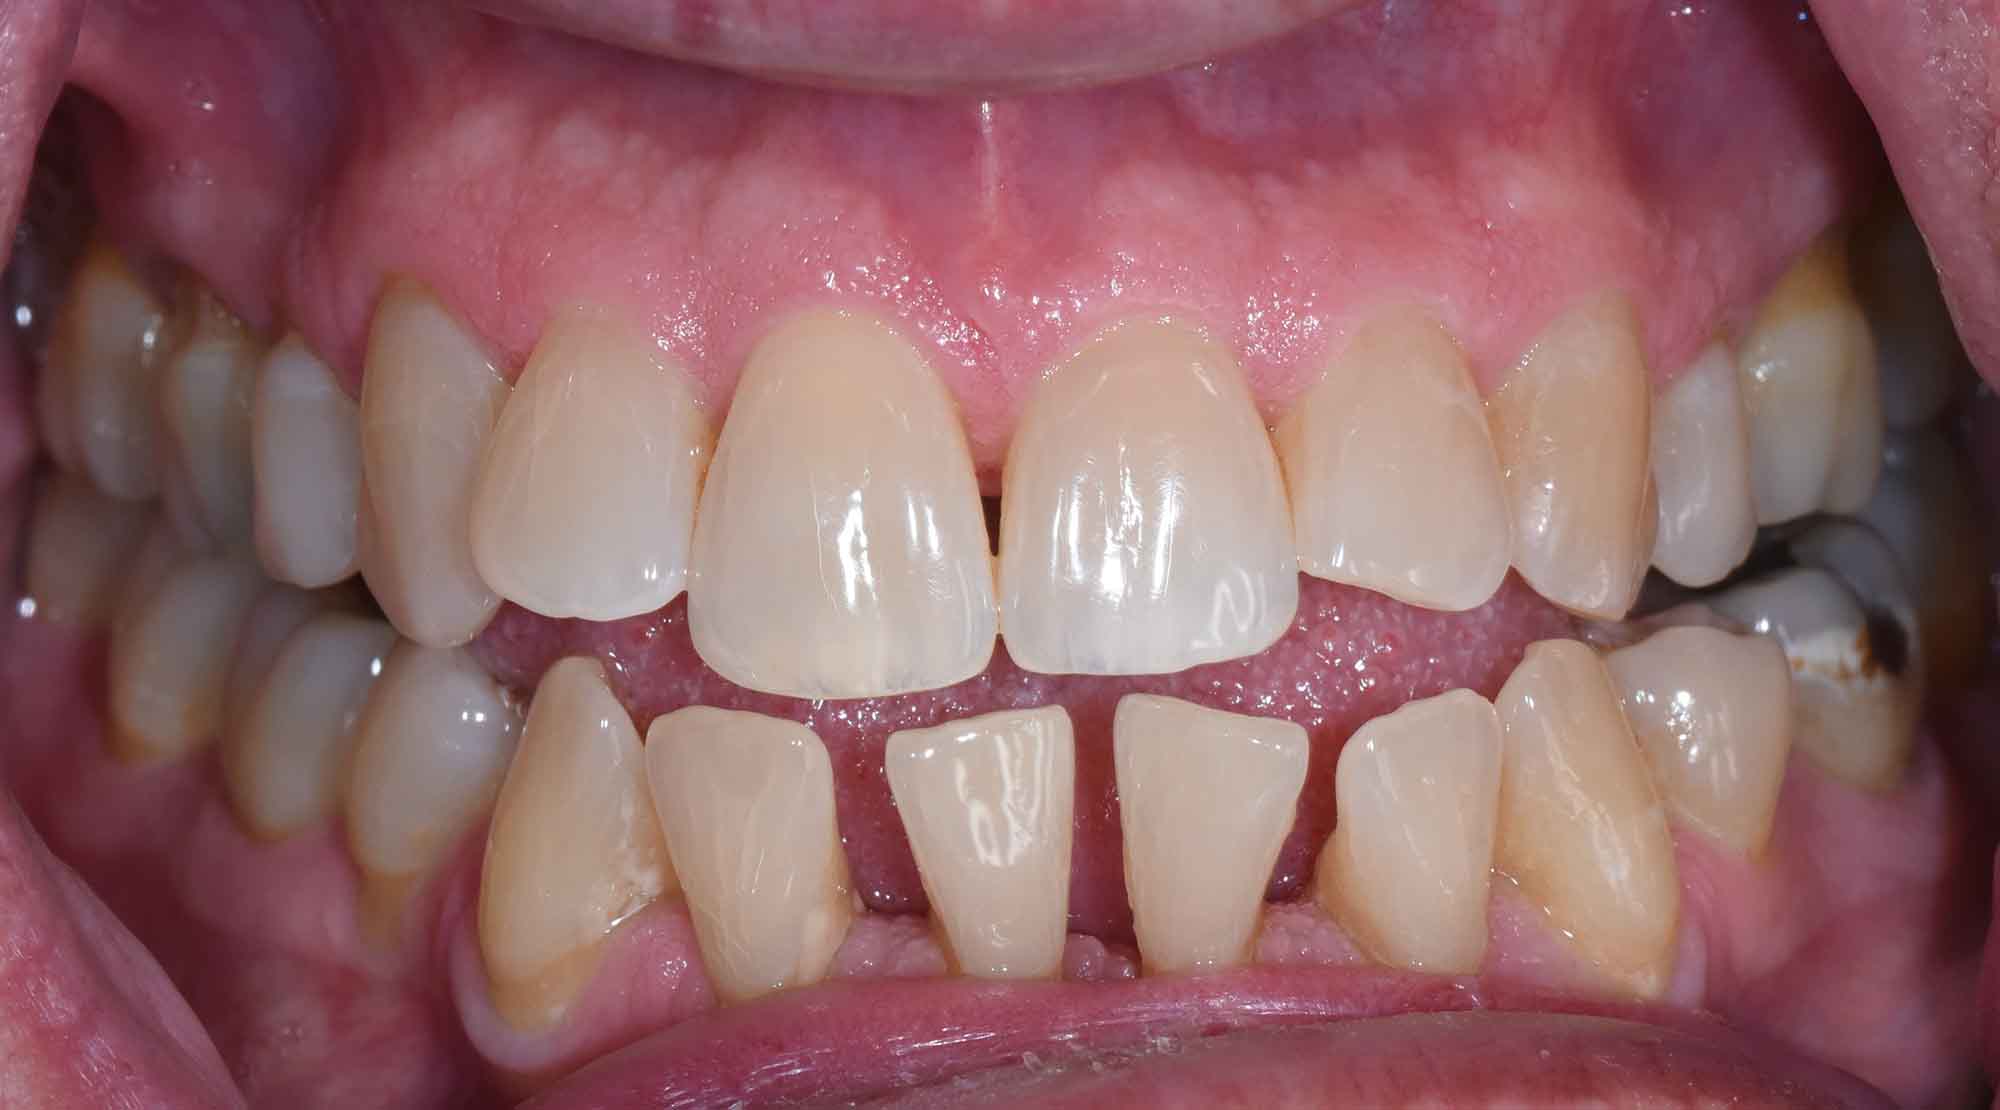 Second example before Invisalign